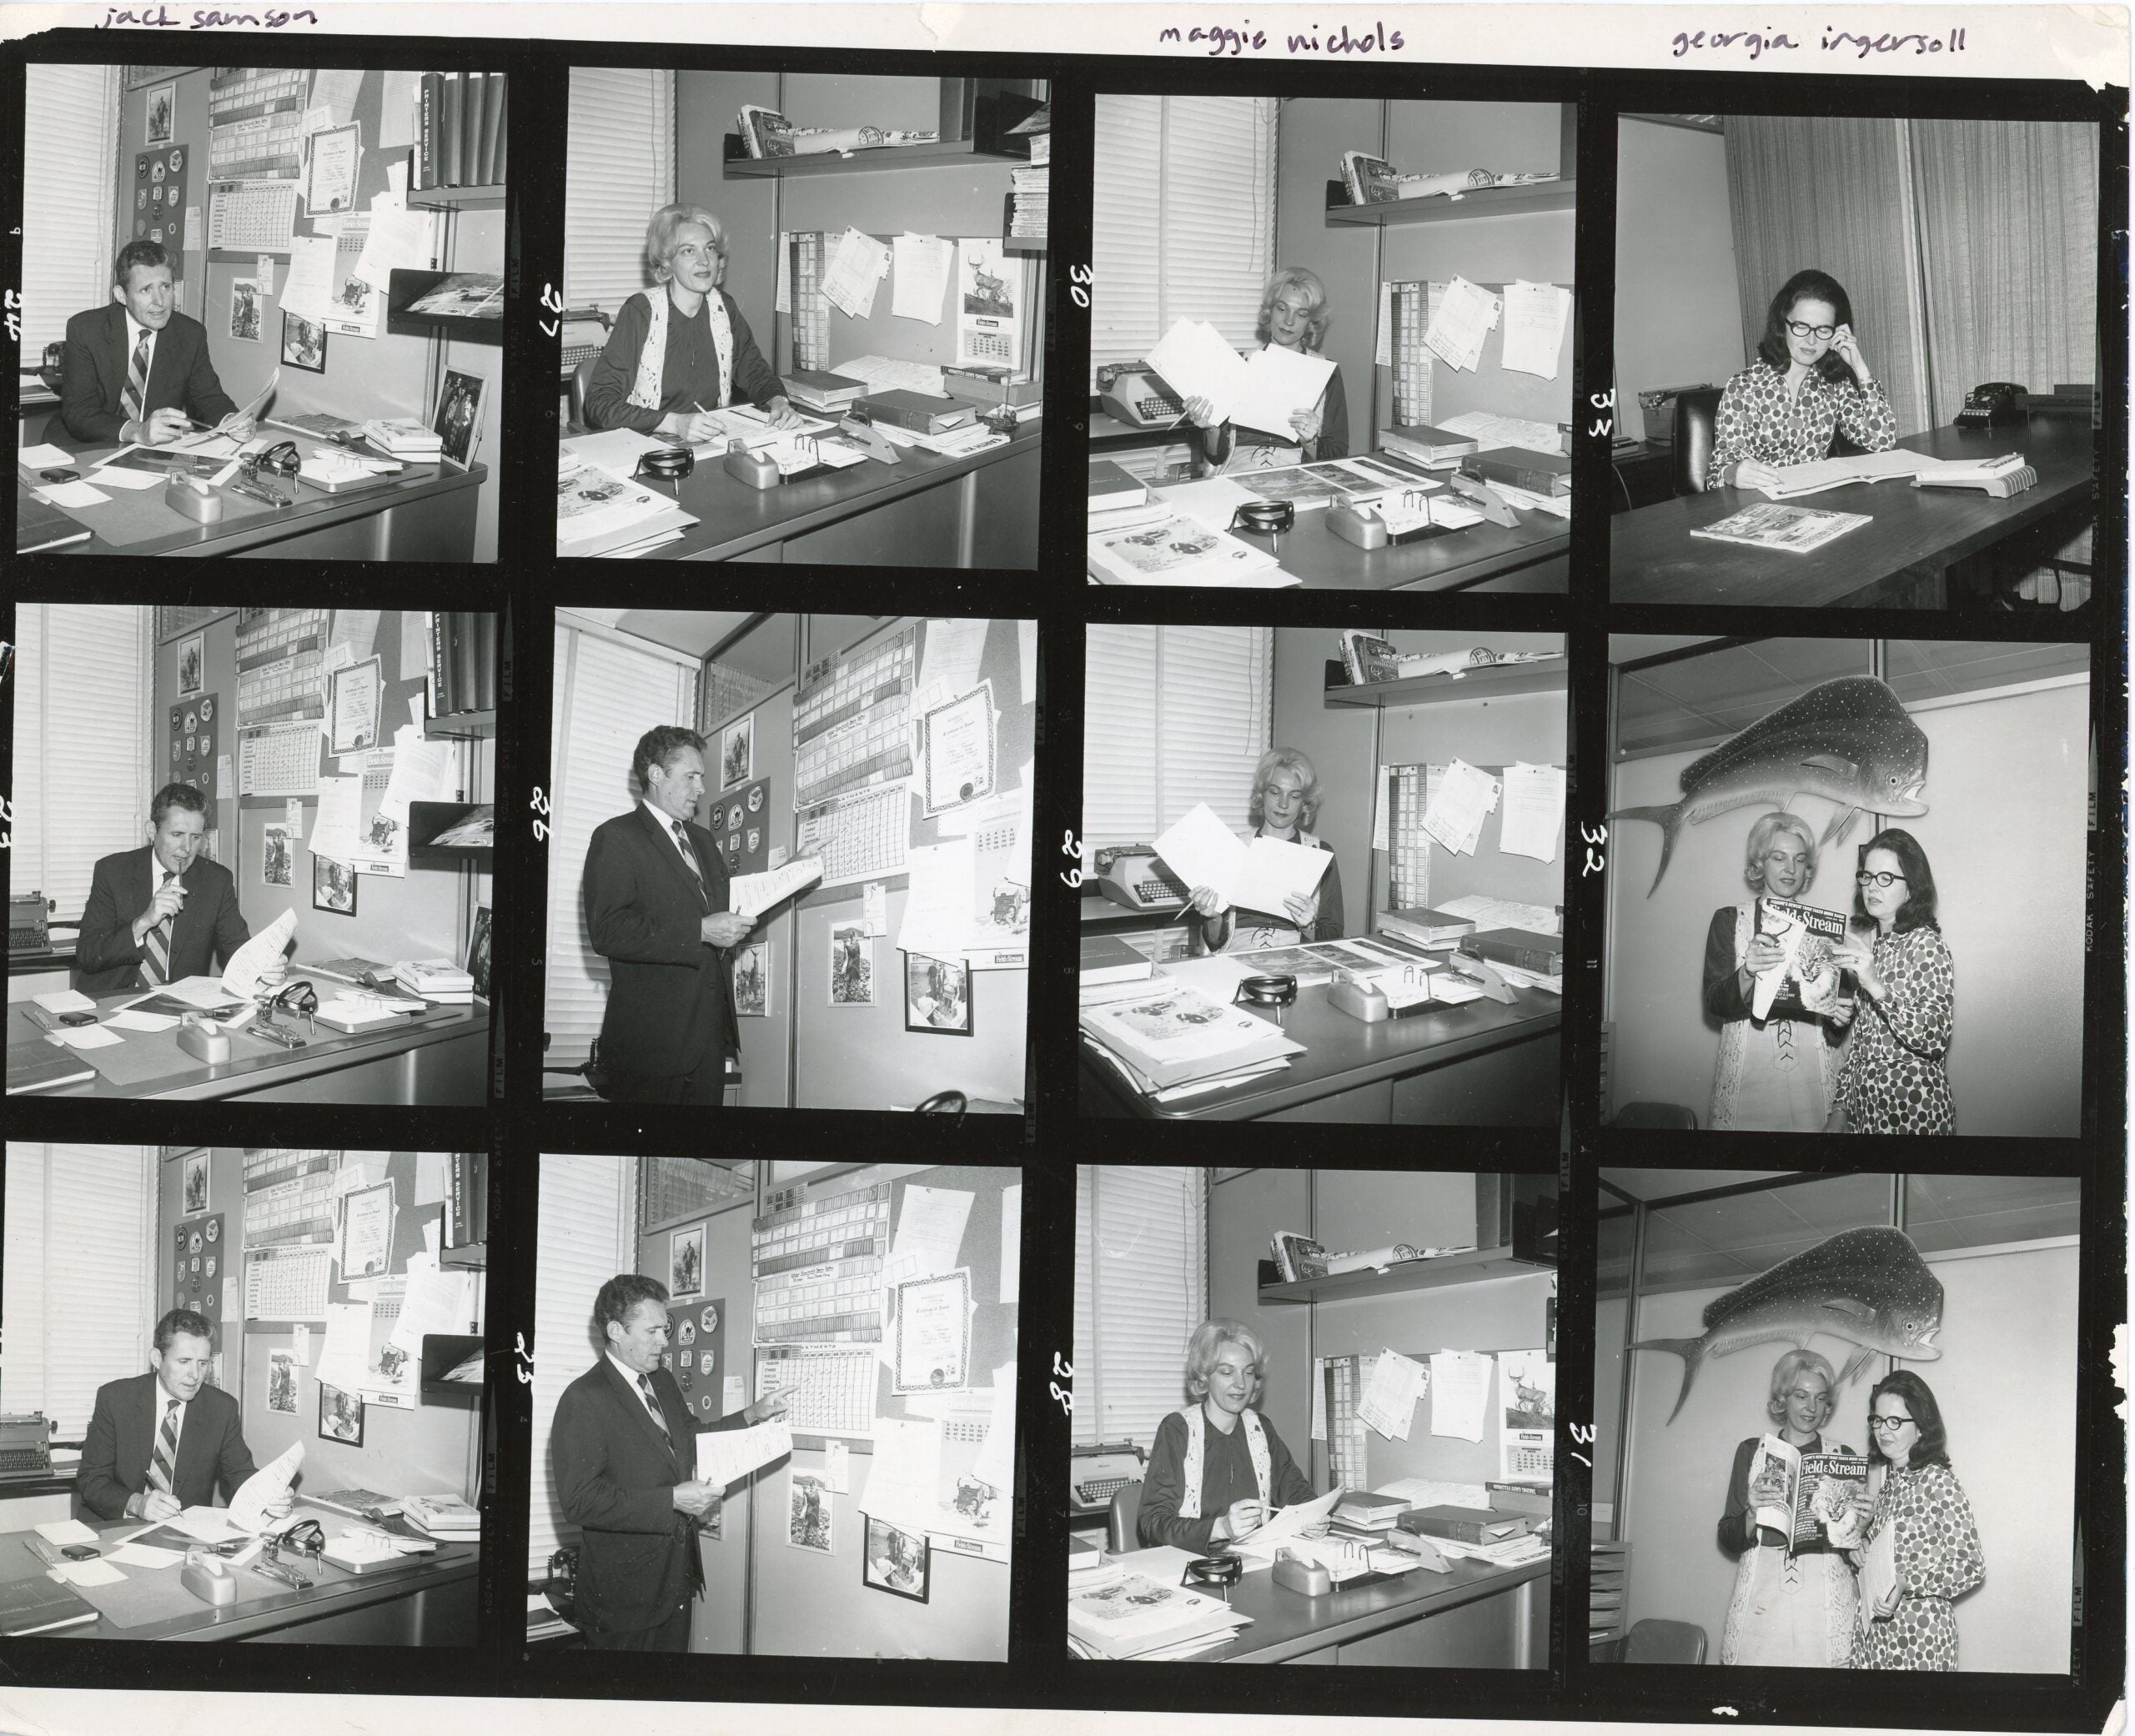 A contact sheet of photos taken from the Field & Stream offices in the 70s.